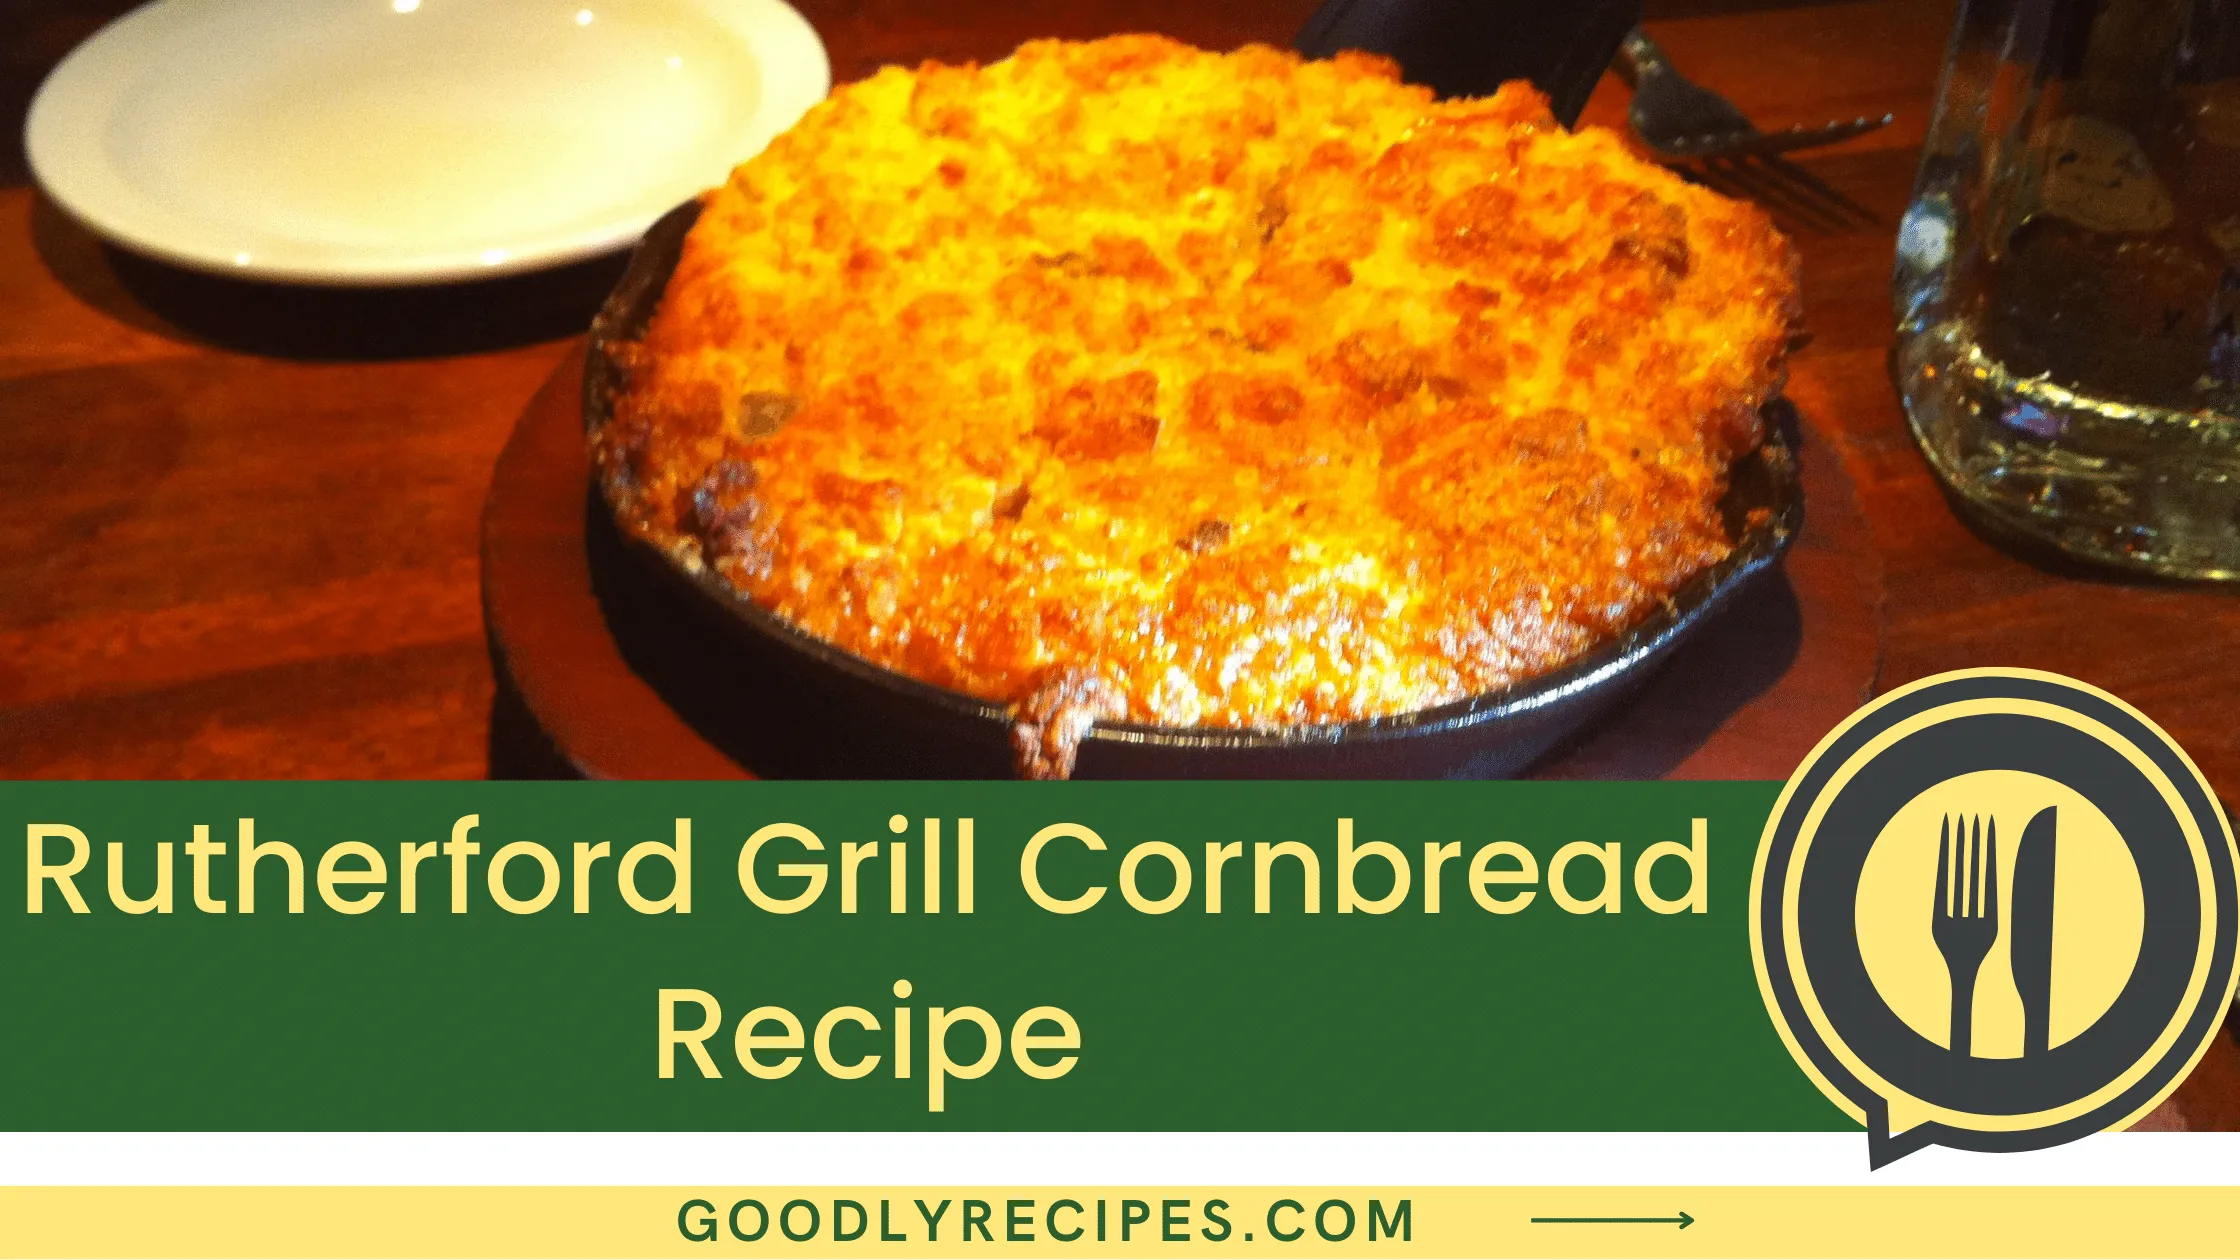 Rutherford Grill Cornbread Recipe - For Food Lovers